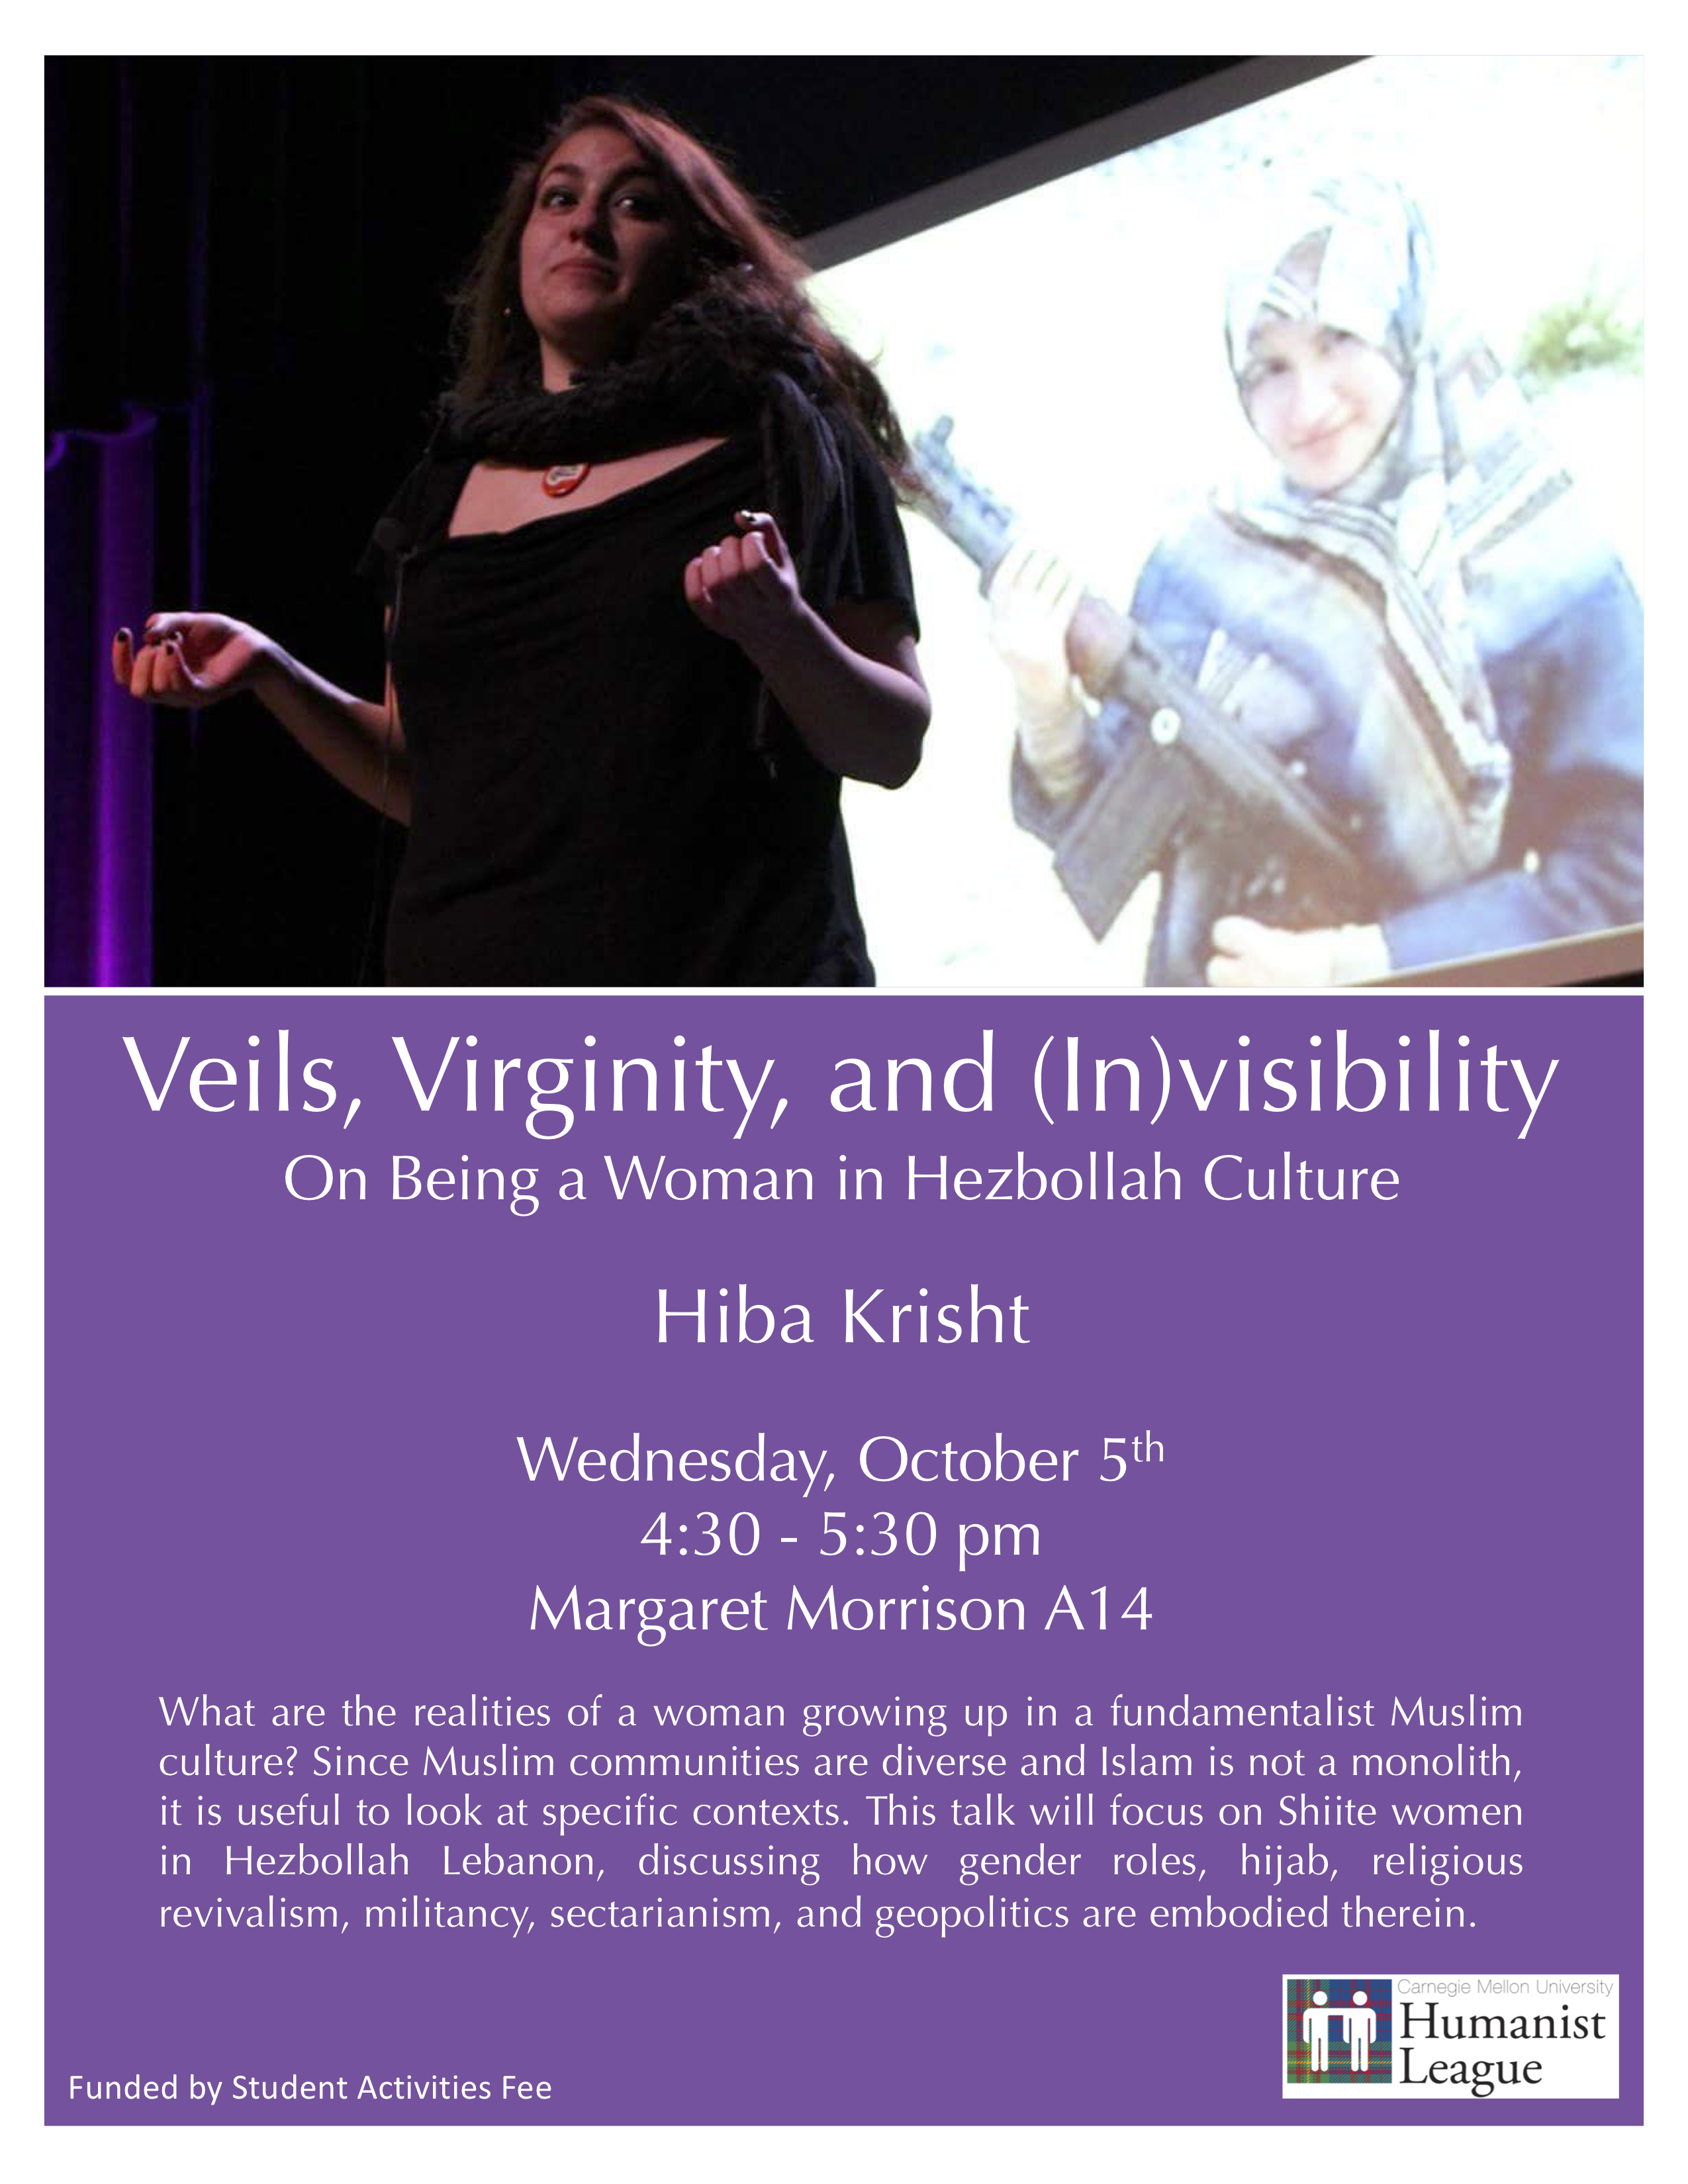 Hiba Krisht – Veils, Virginity, and (In)visibility Poster